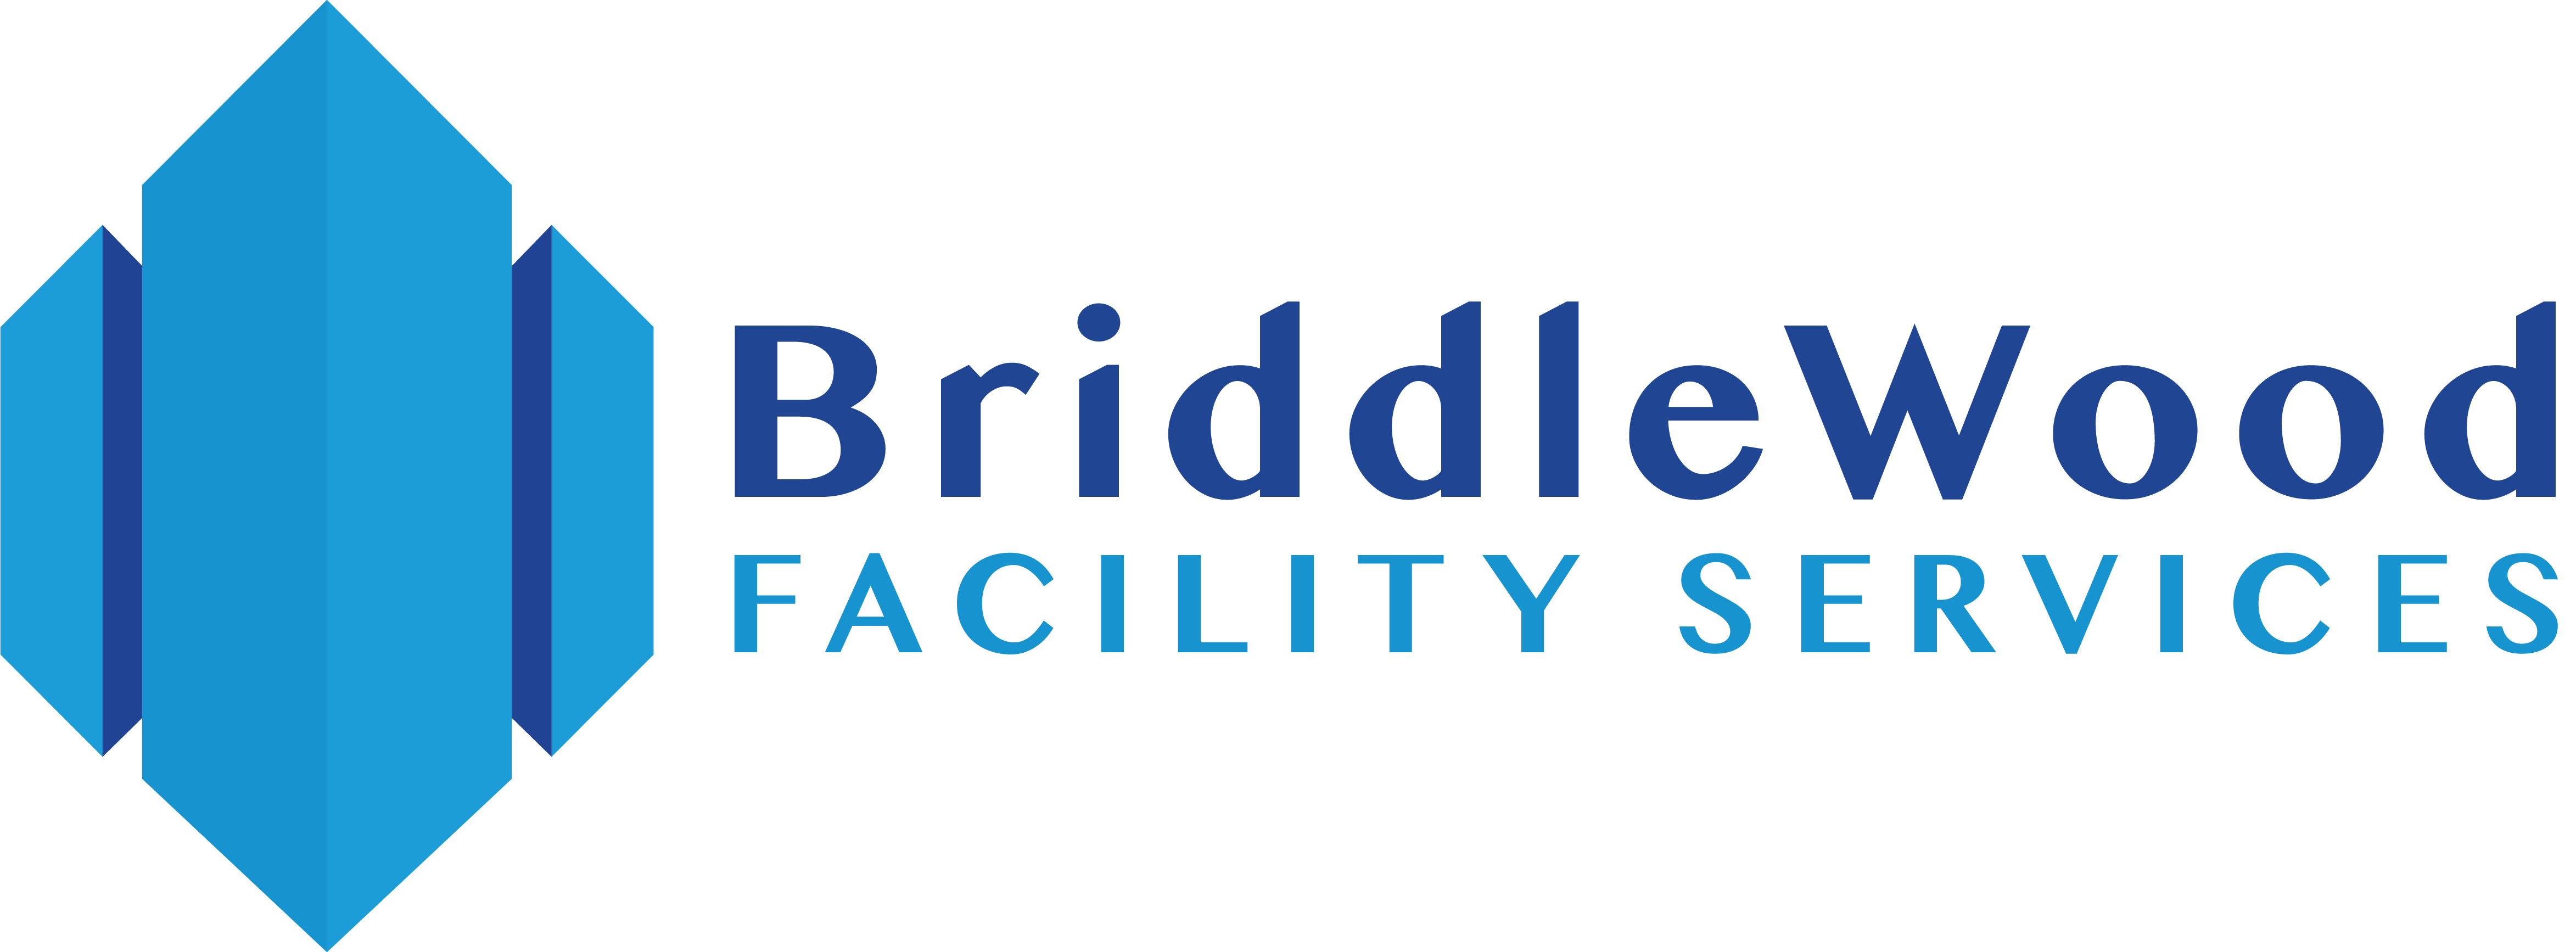 BriddleWood Facility Services